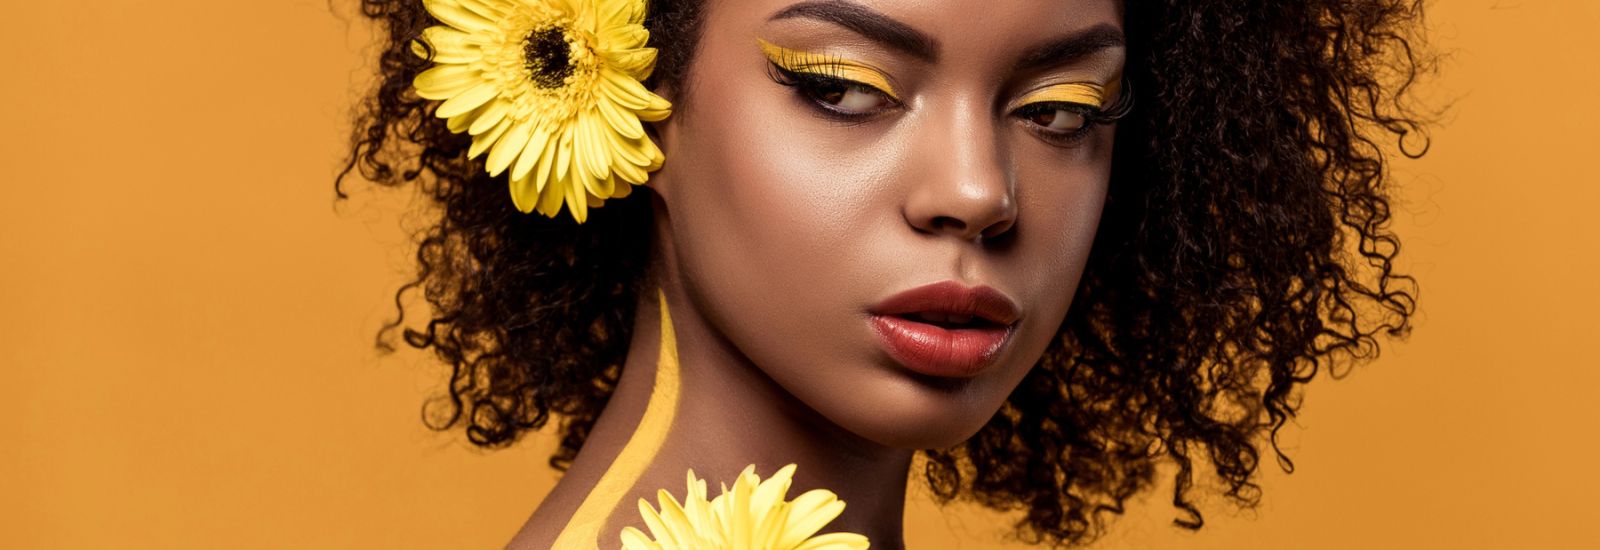 Young bright african american woman with artistic make-up